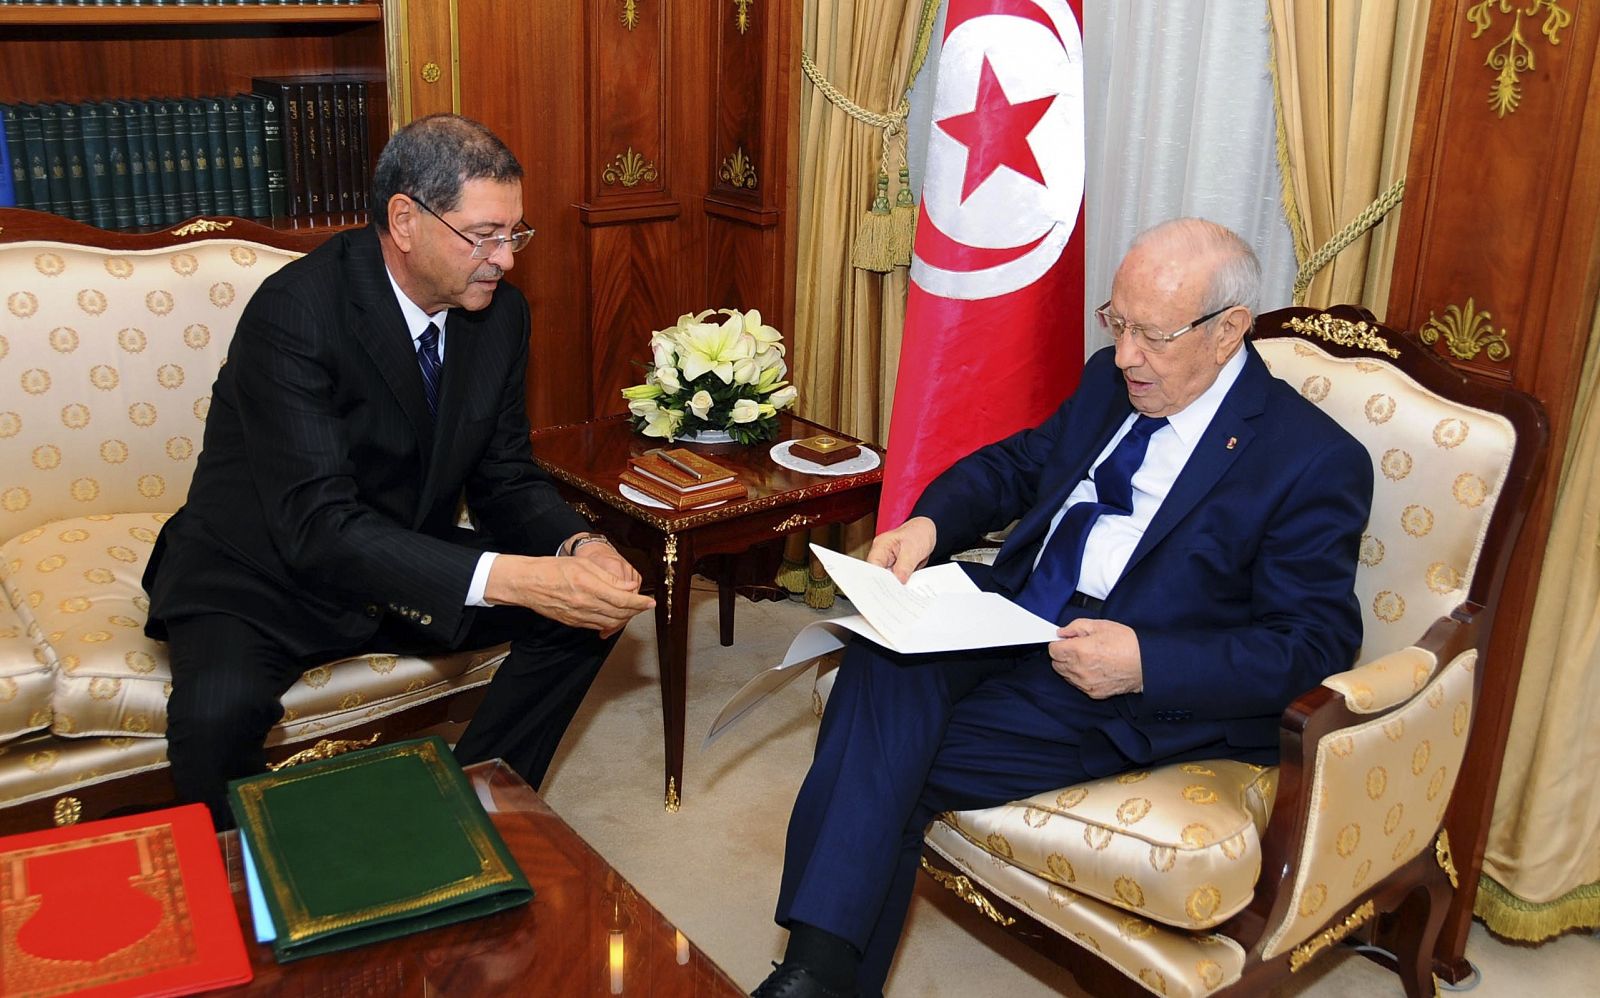 Tunisia's nominated prime minister Habib Essid gives the list of the new government to President Beji Caid Essebsi in Tunis